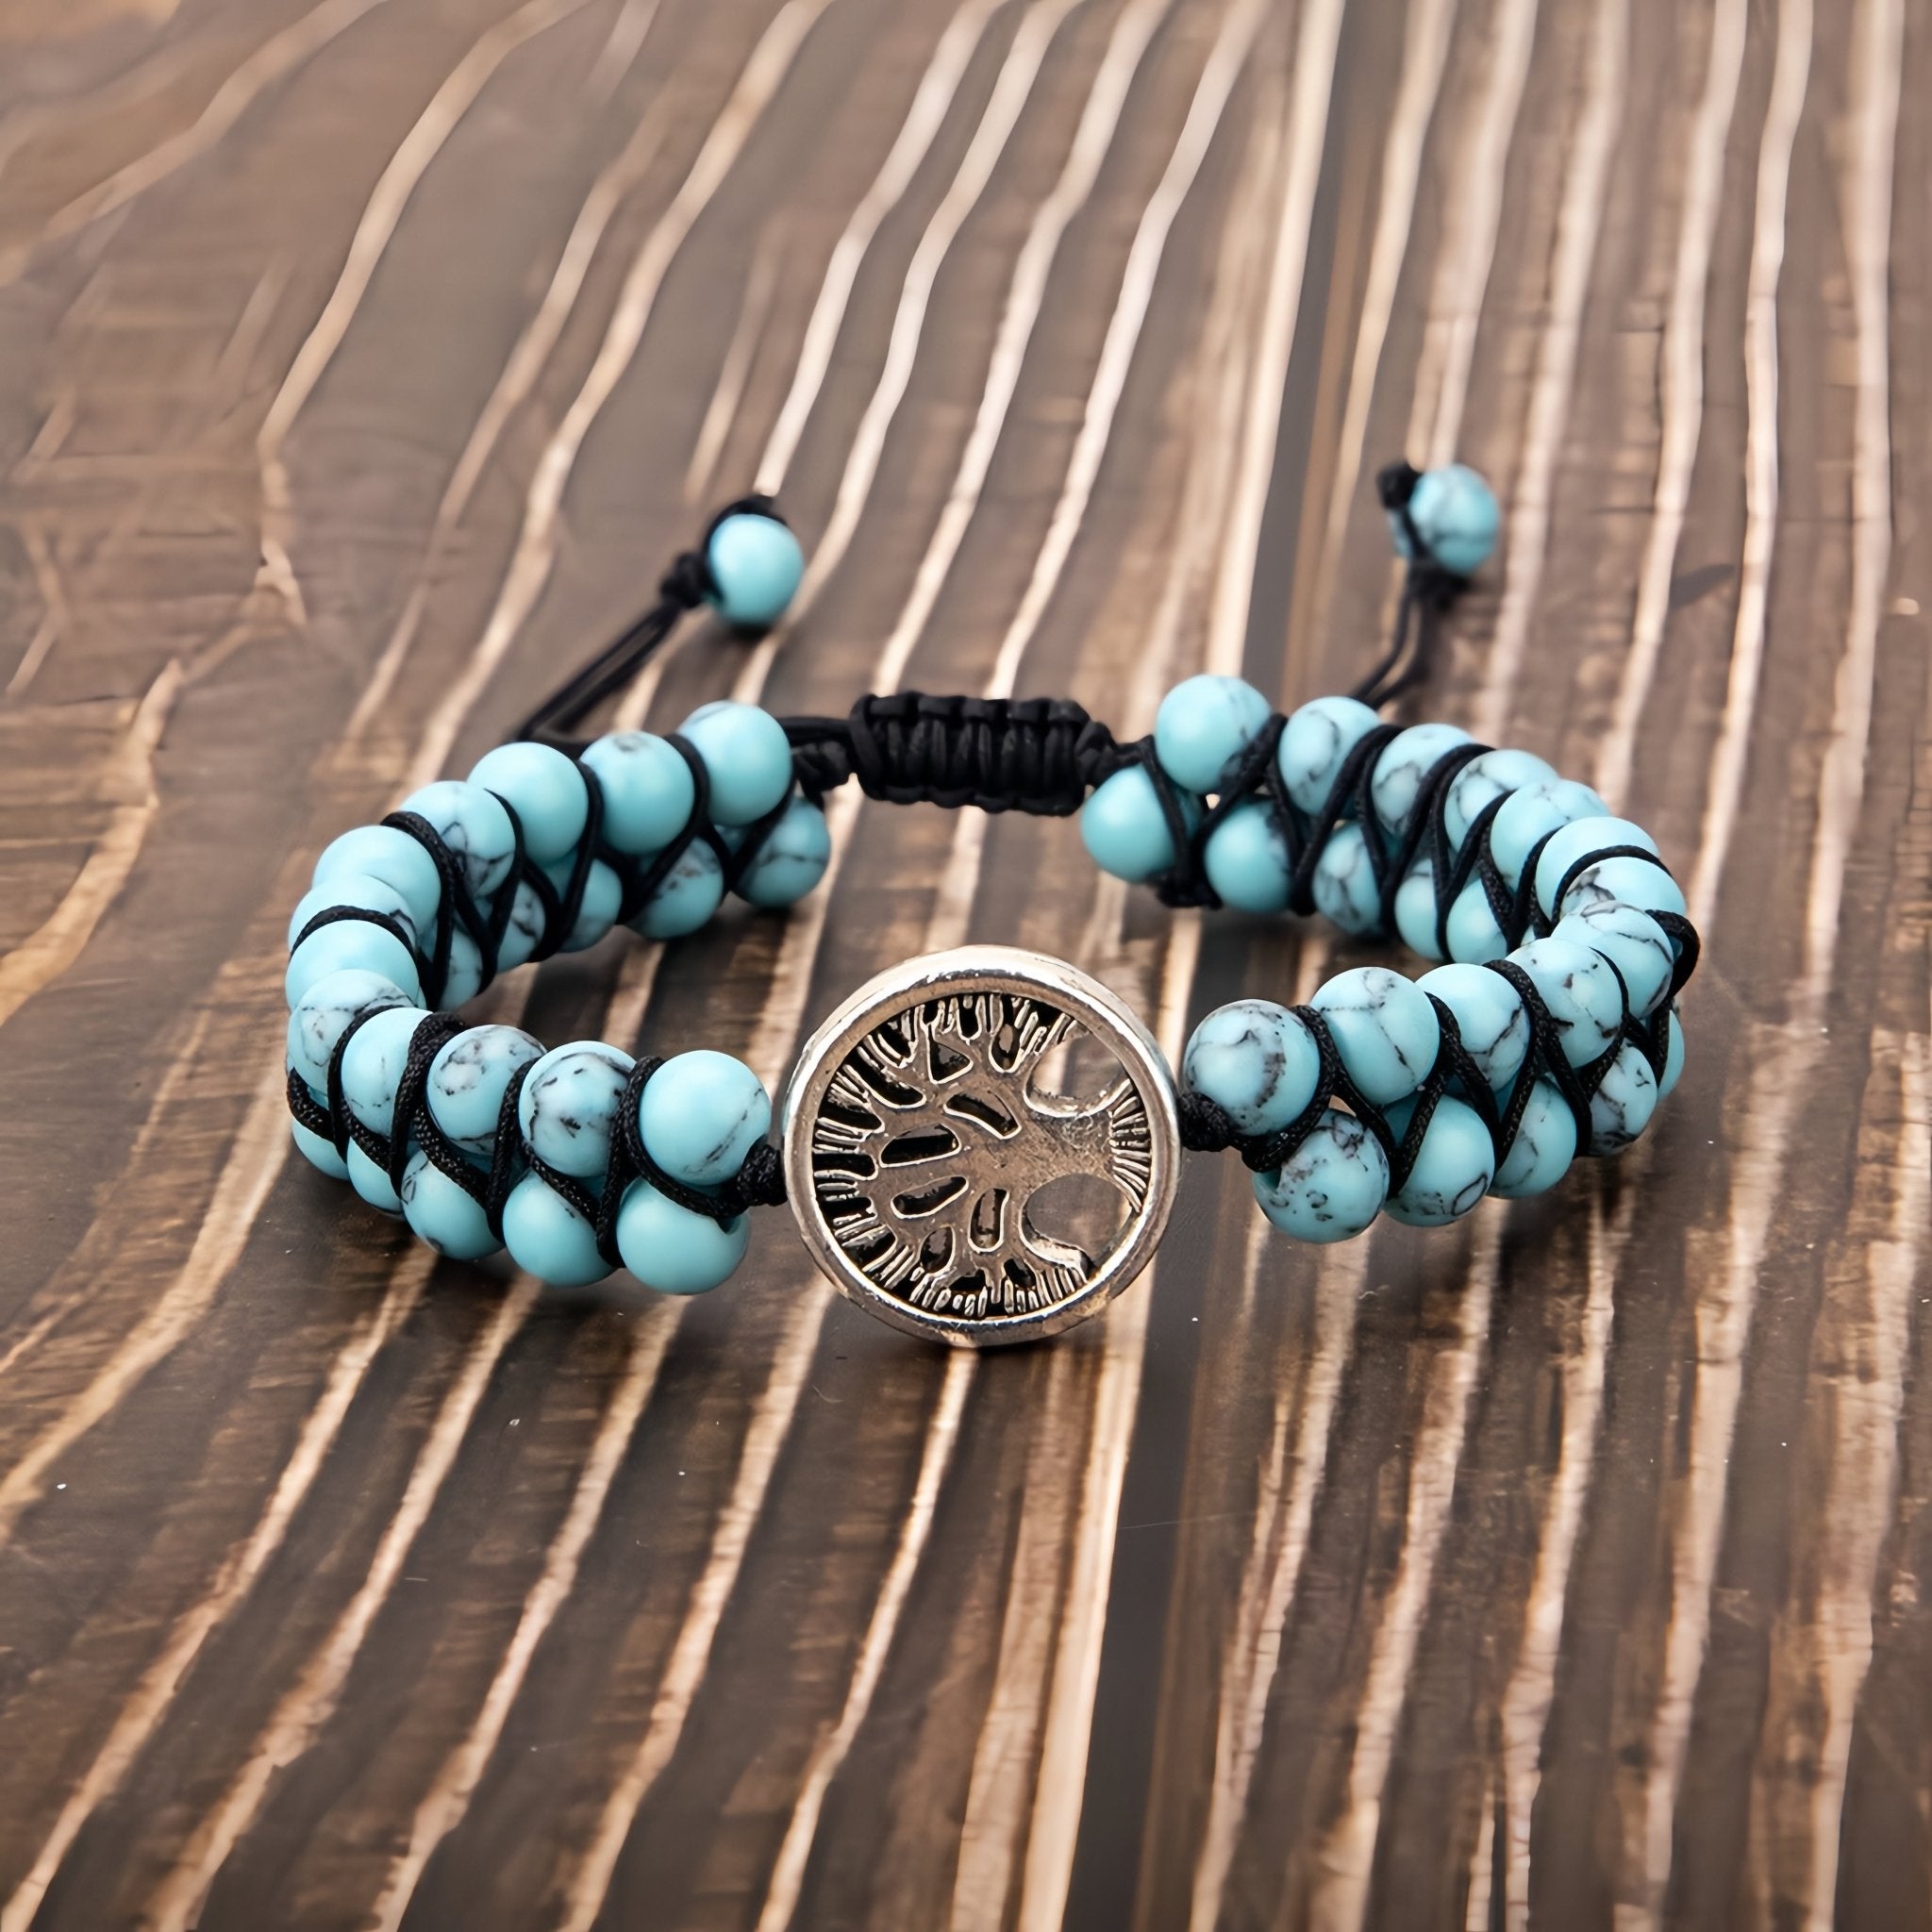 Handmade turquoise beaded yoga bracelet featuring a tree of life silver charm.